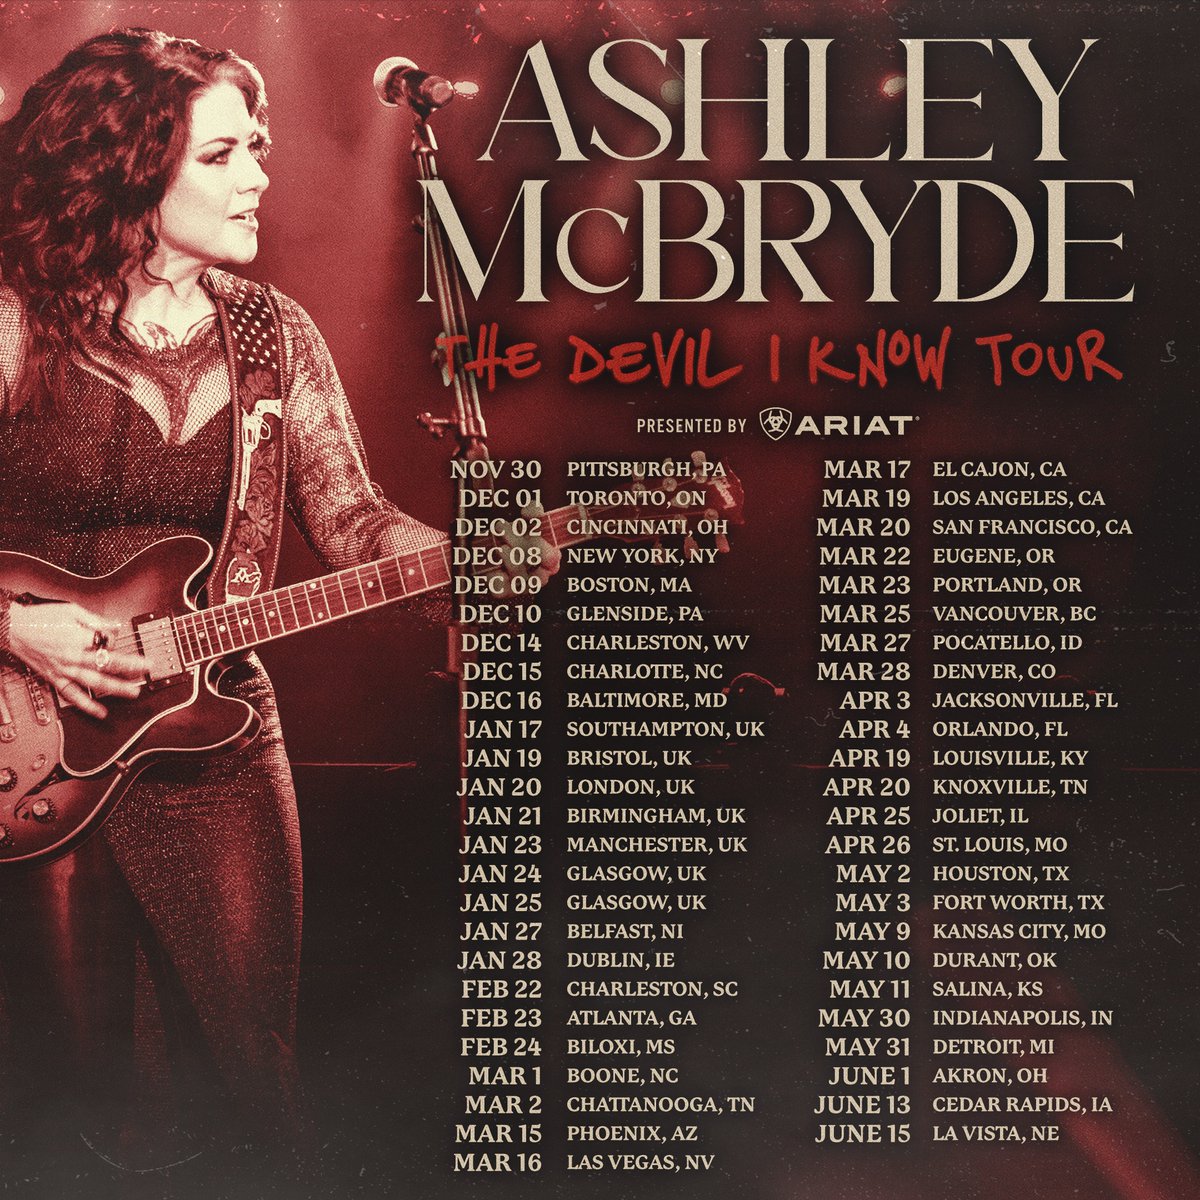 #TheDevilIKnowTour presented by @Ariat is going strong and rolling through a city near you! All dates are on sale now, so grab those tickets and join us for a an incredible show that we are so excited to share. We can't wait to see you.
ashleymcbryde.com/tour